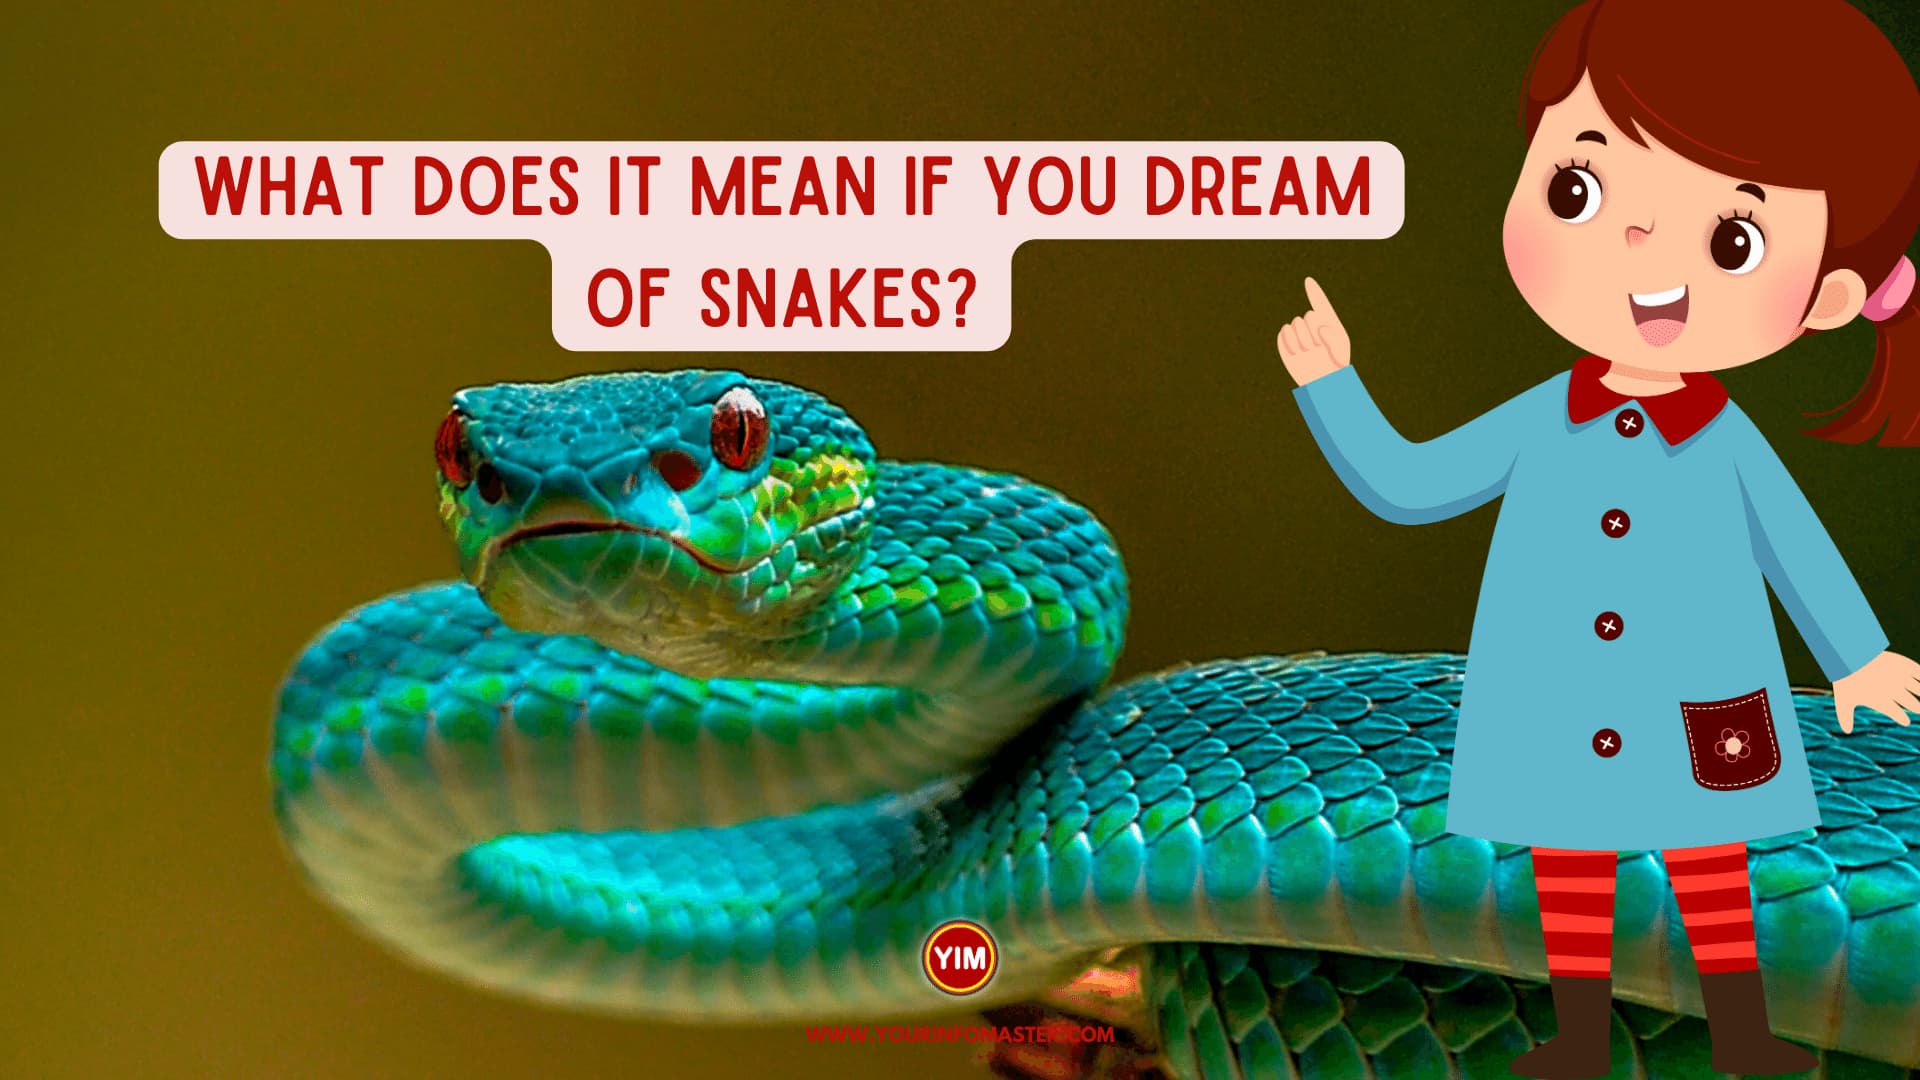 What does it mean if you dream of snakes